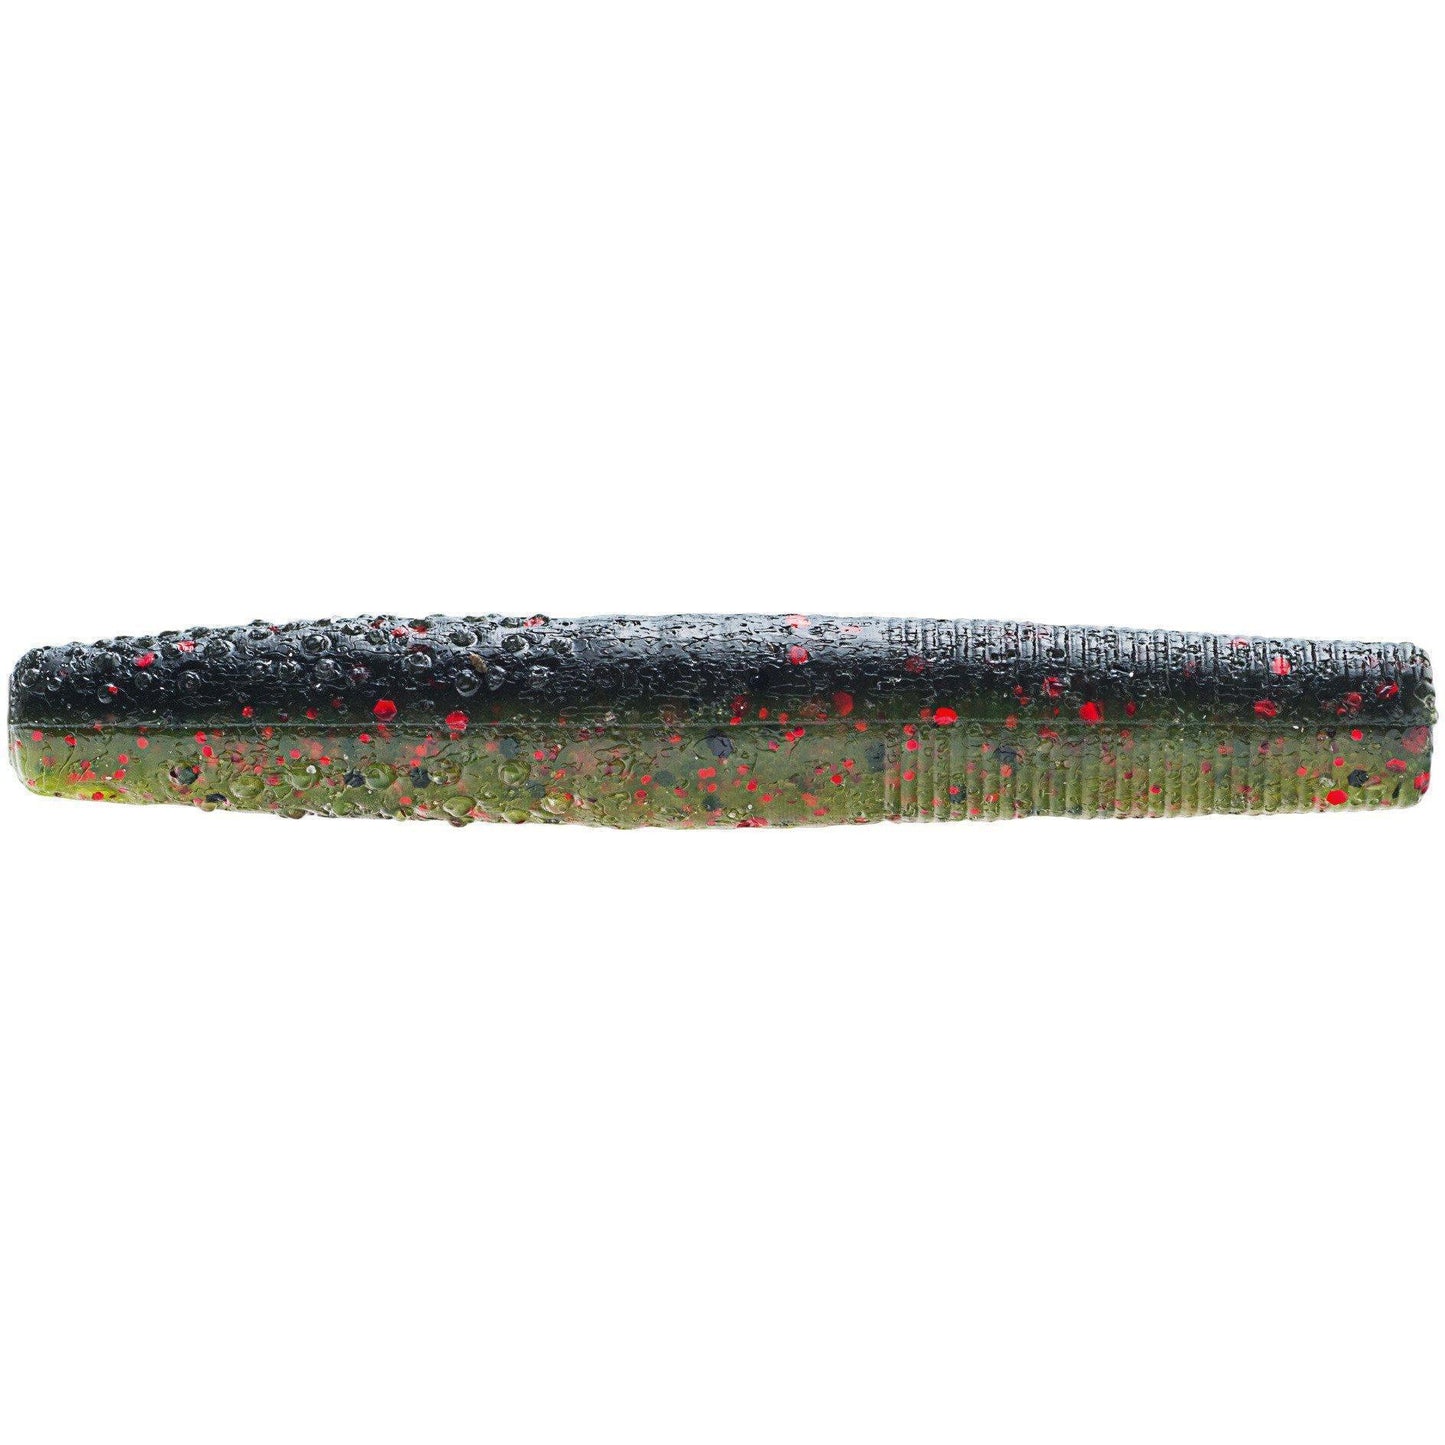 Z Man Finesse Trd 2.75" California Craw 8 Pack